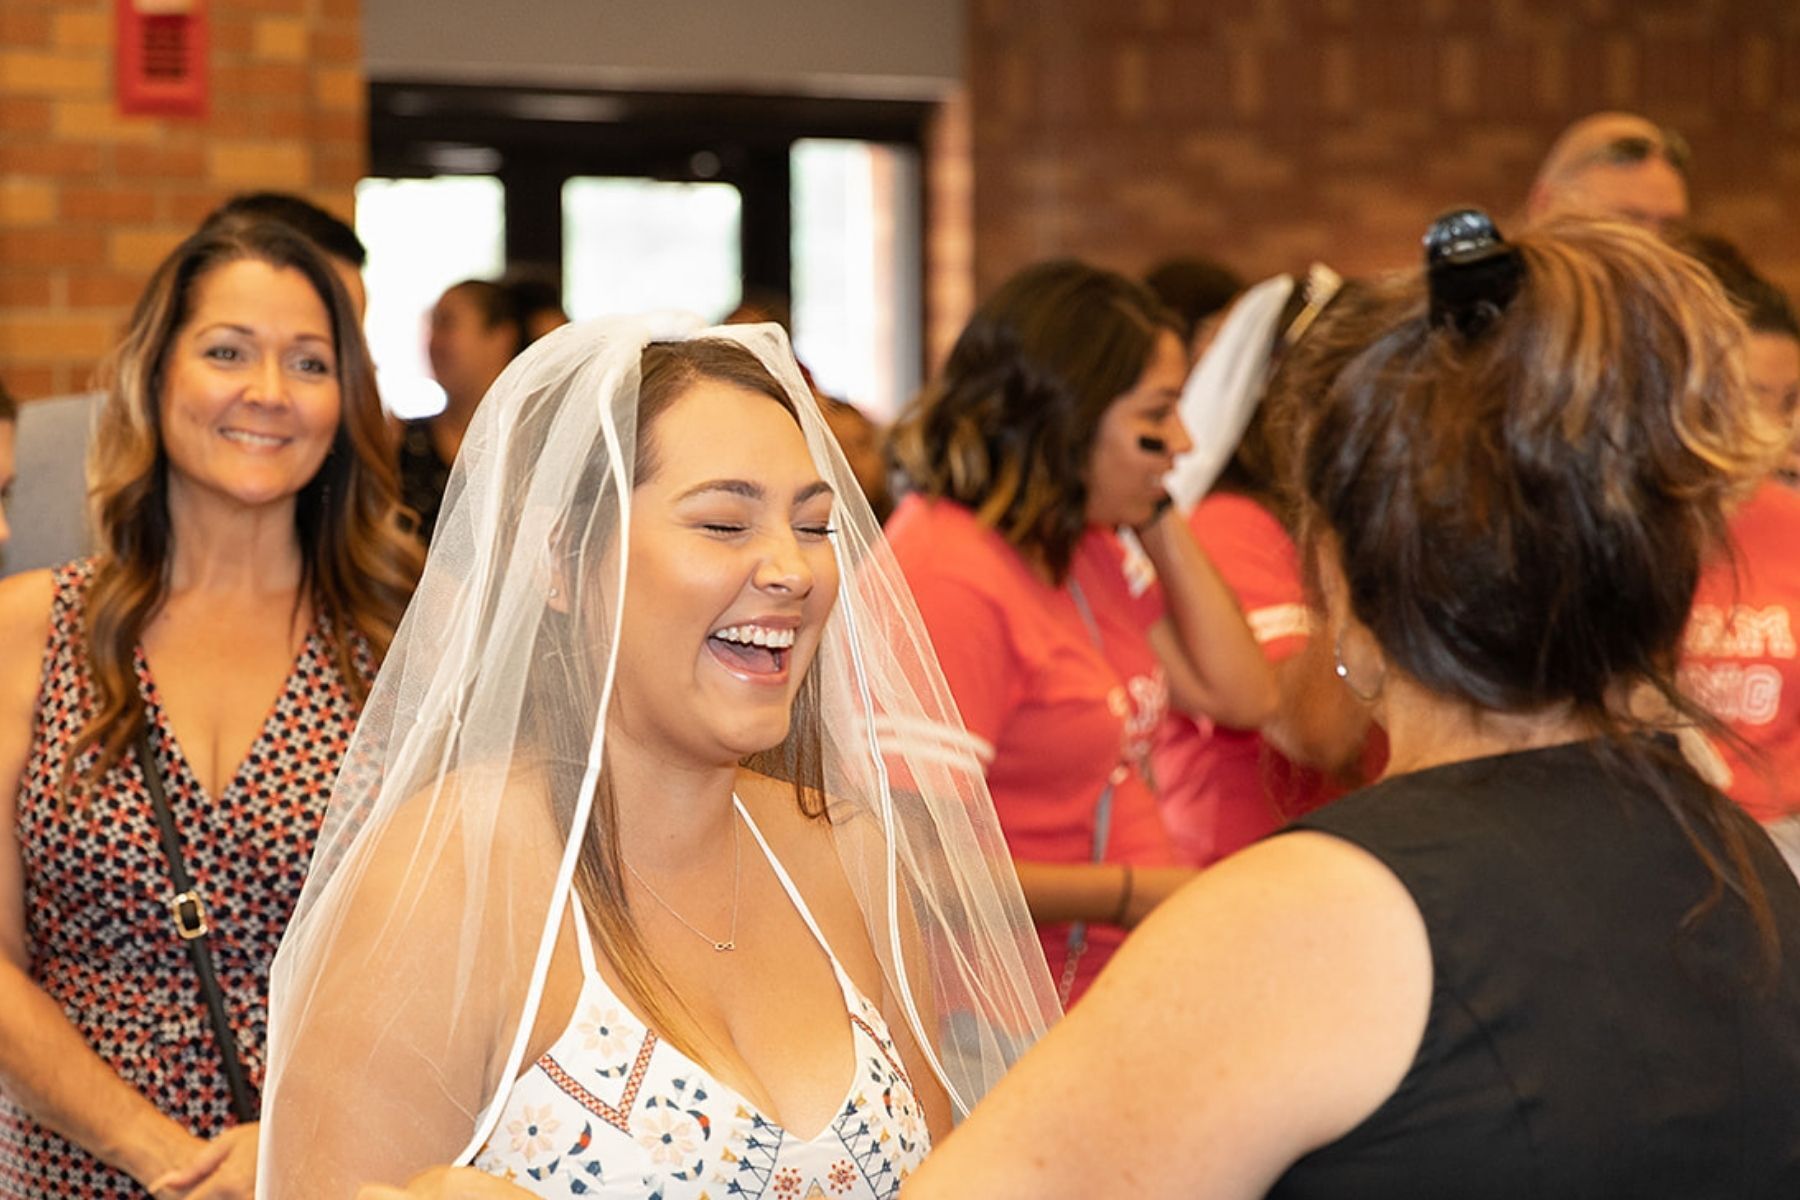 bride in line laughing with wedding veil on with other woman at wedding festival